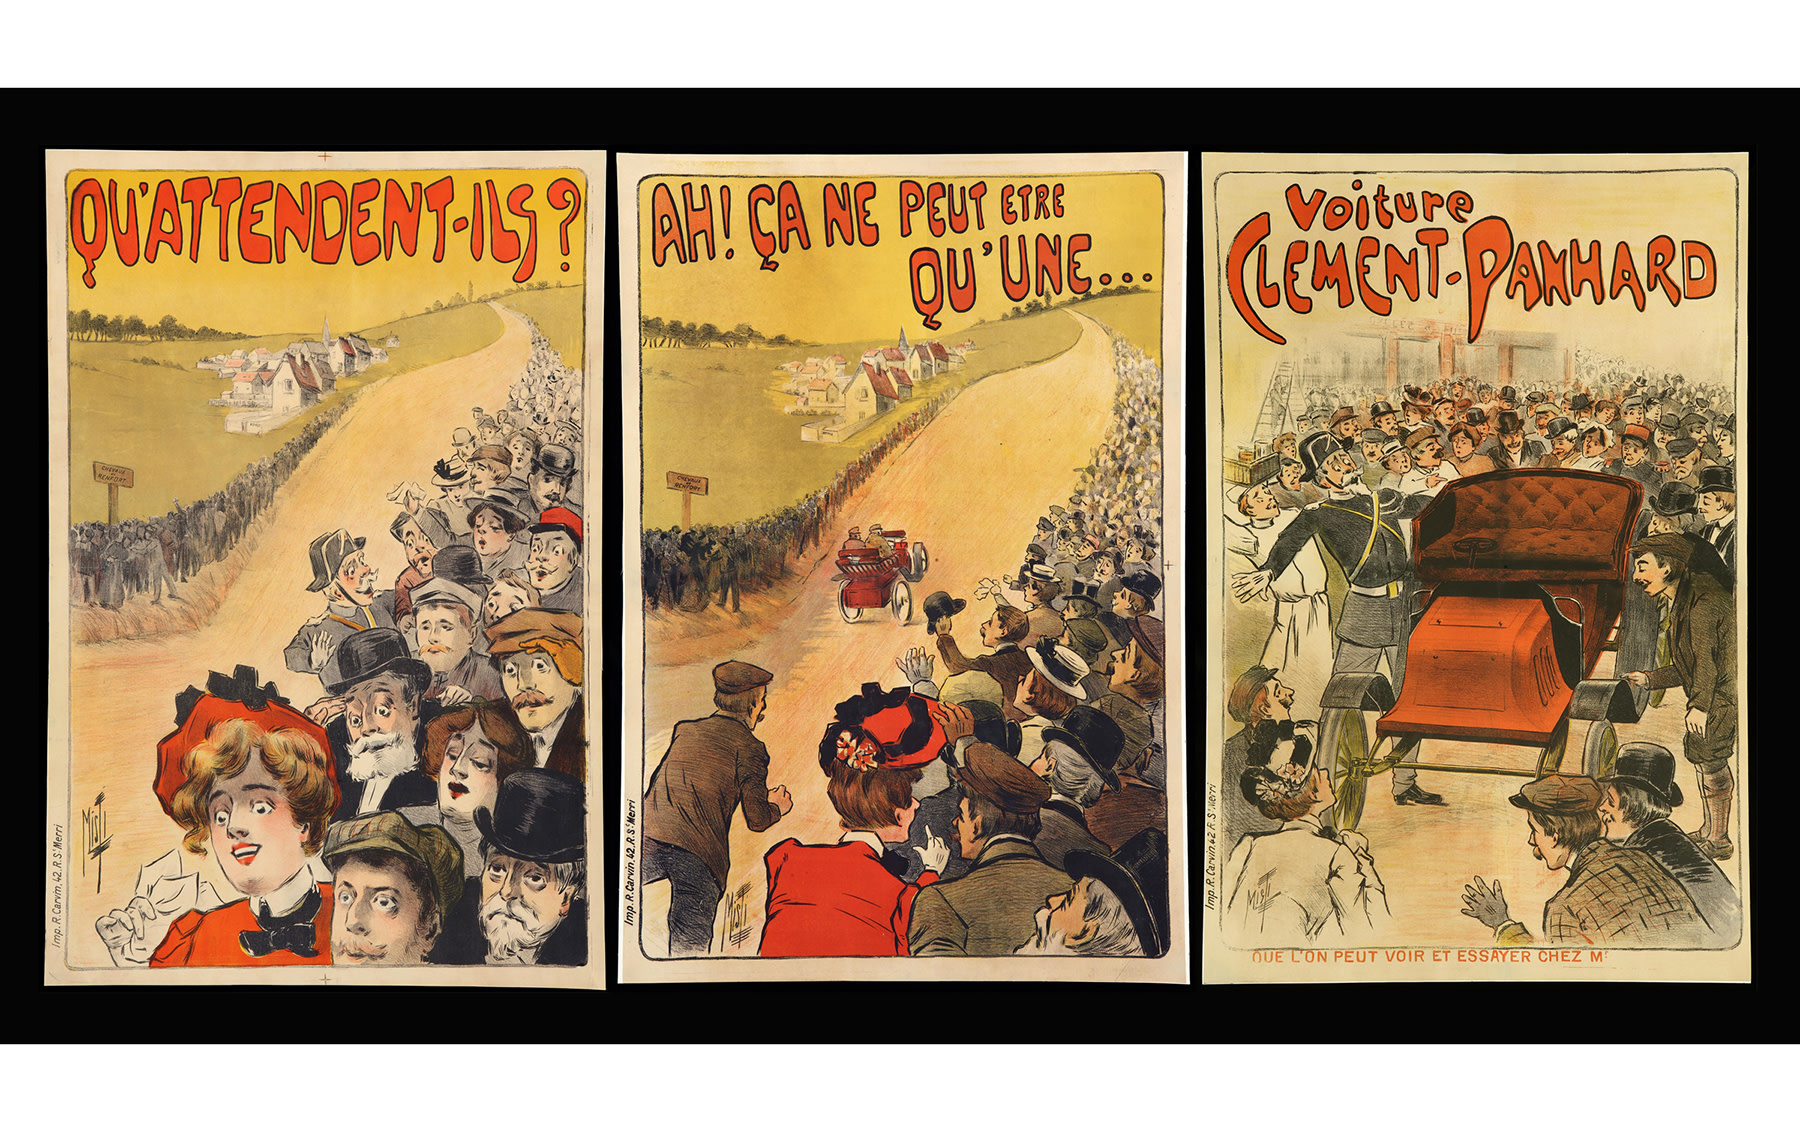 Voiture Clement-Panhard Poster Triptych, by Misti, 1900